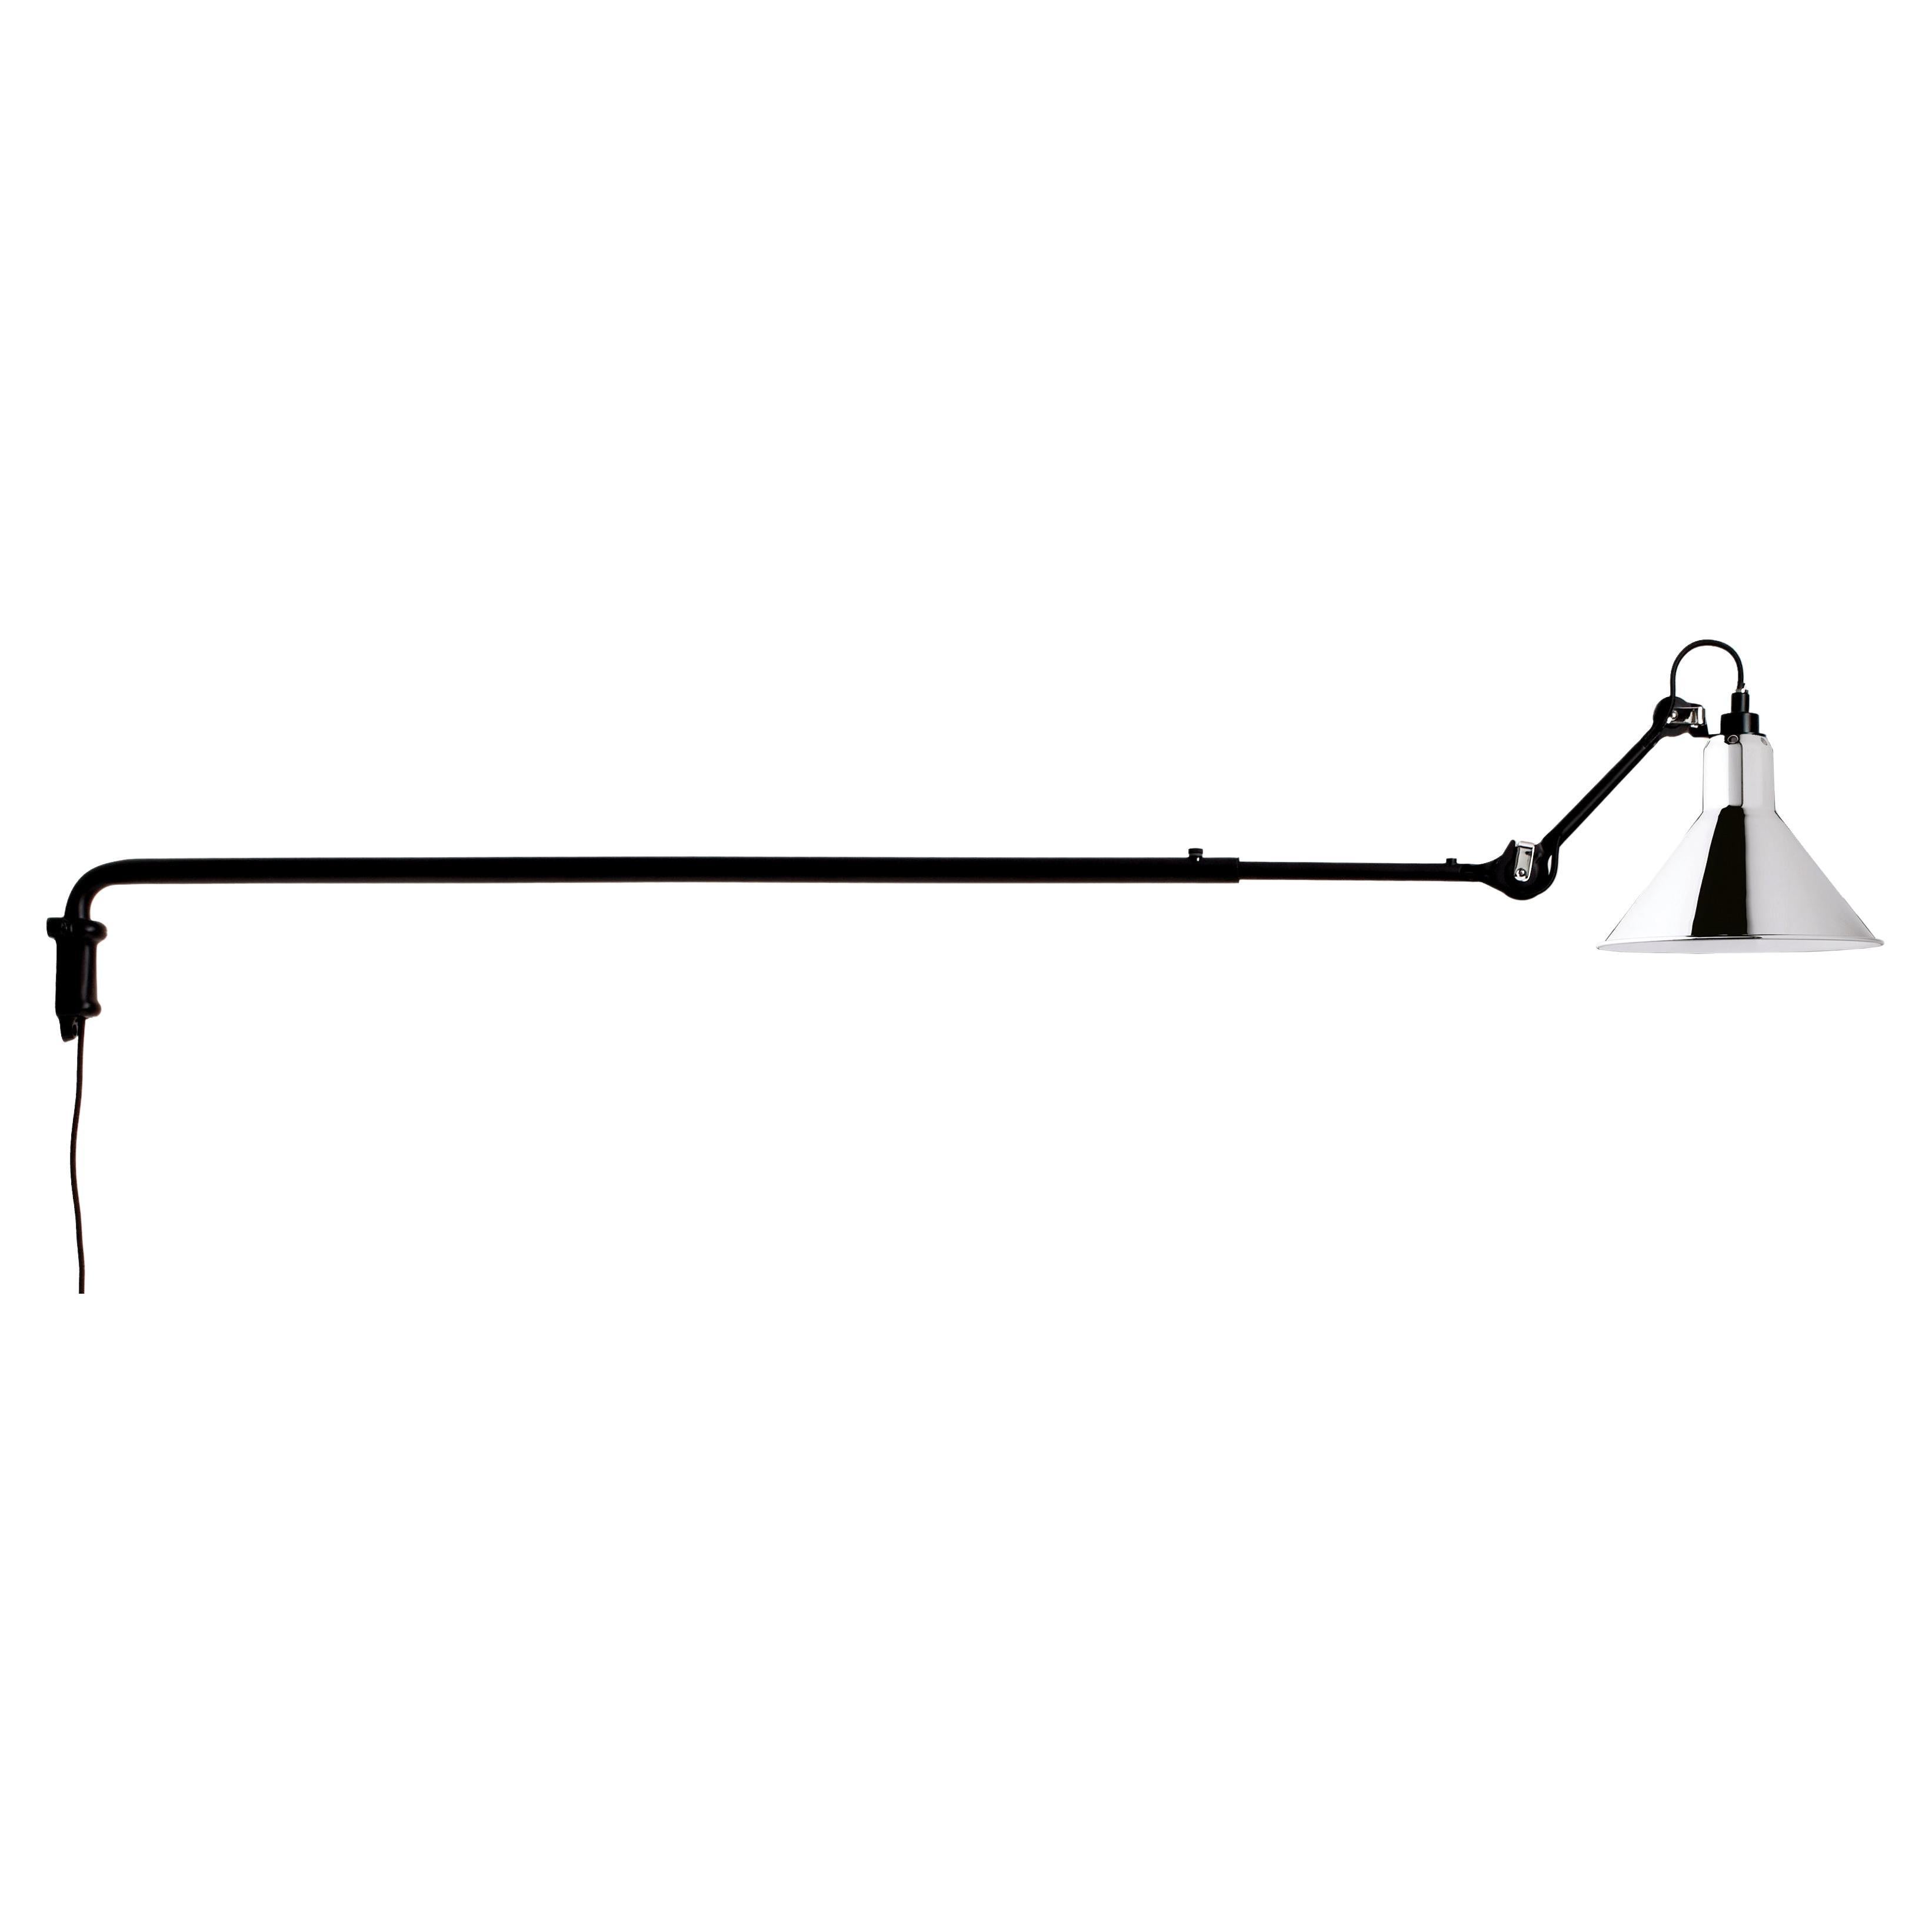 DCW Editions La Lampe Gras N°213 Wall Lamp in Black Arm and Chrome Shade For Sale